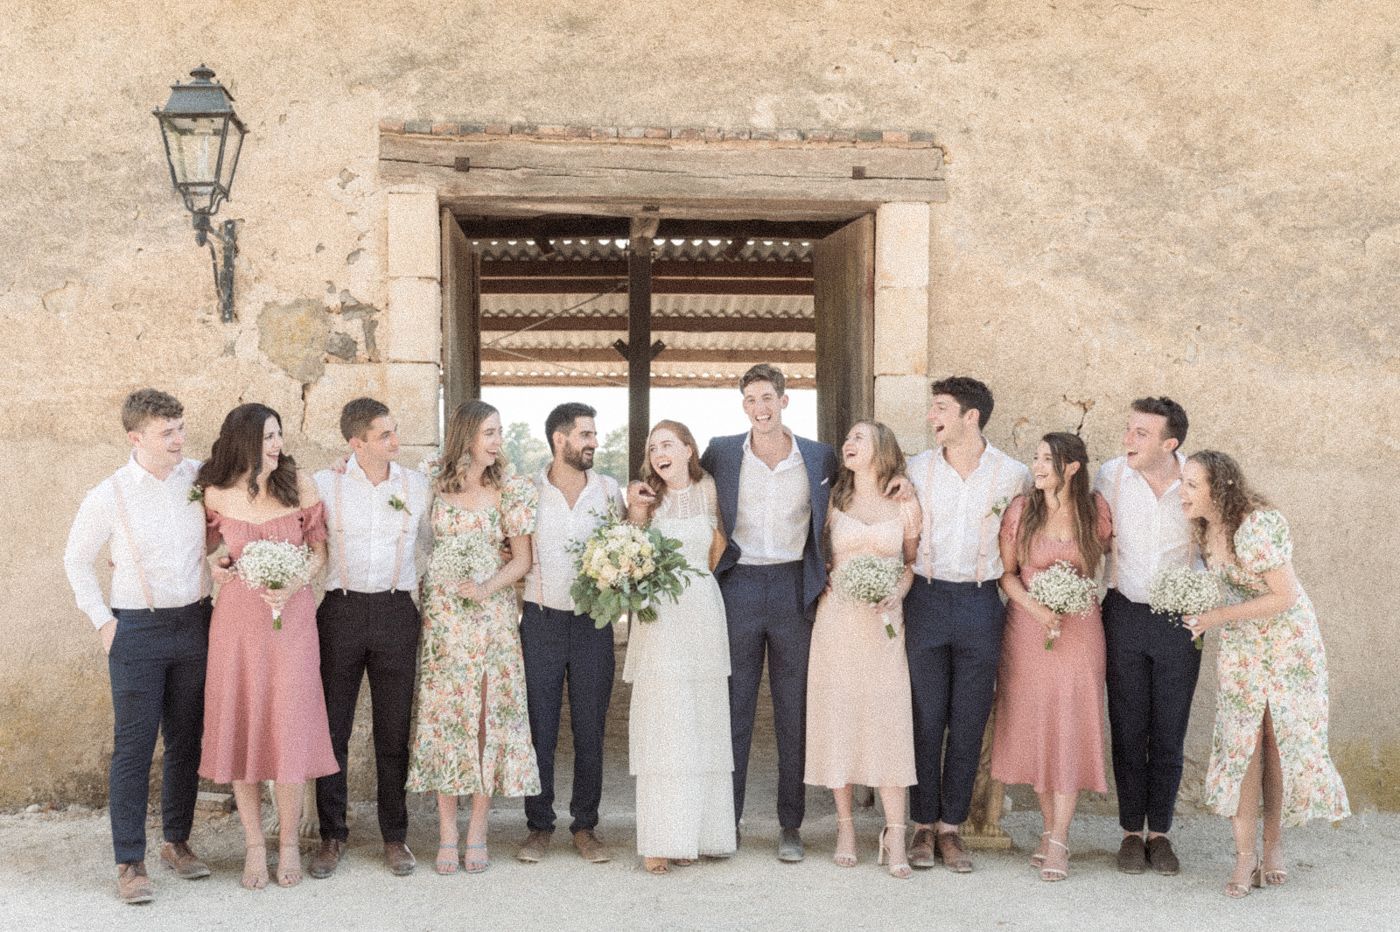 A wedding group photo in front of a rustic French barn